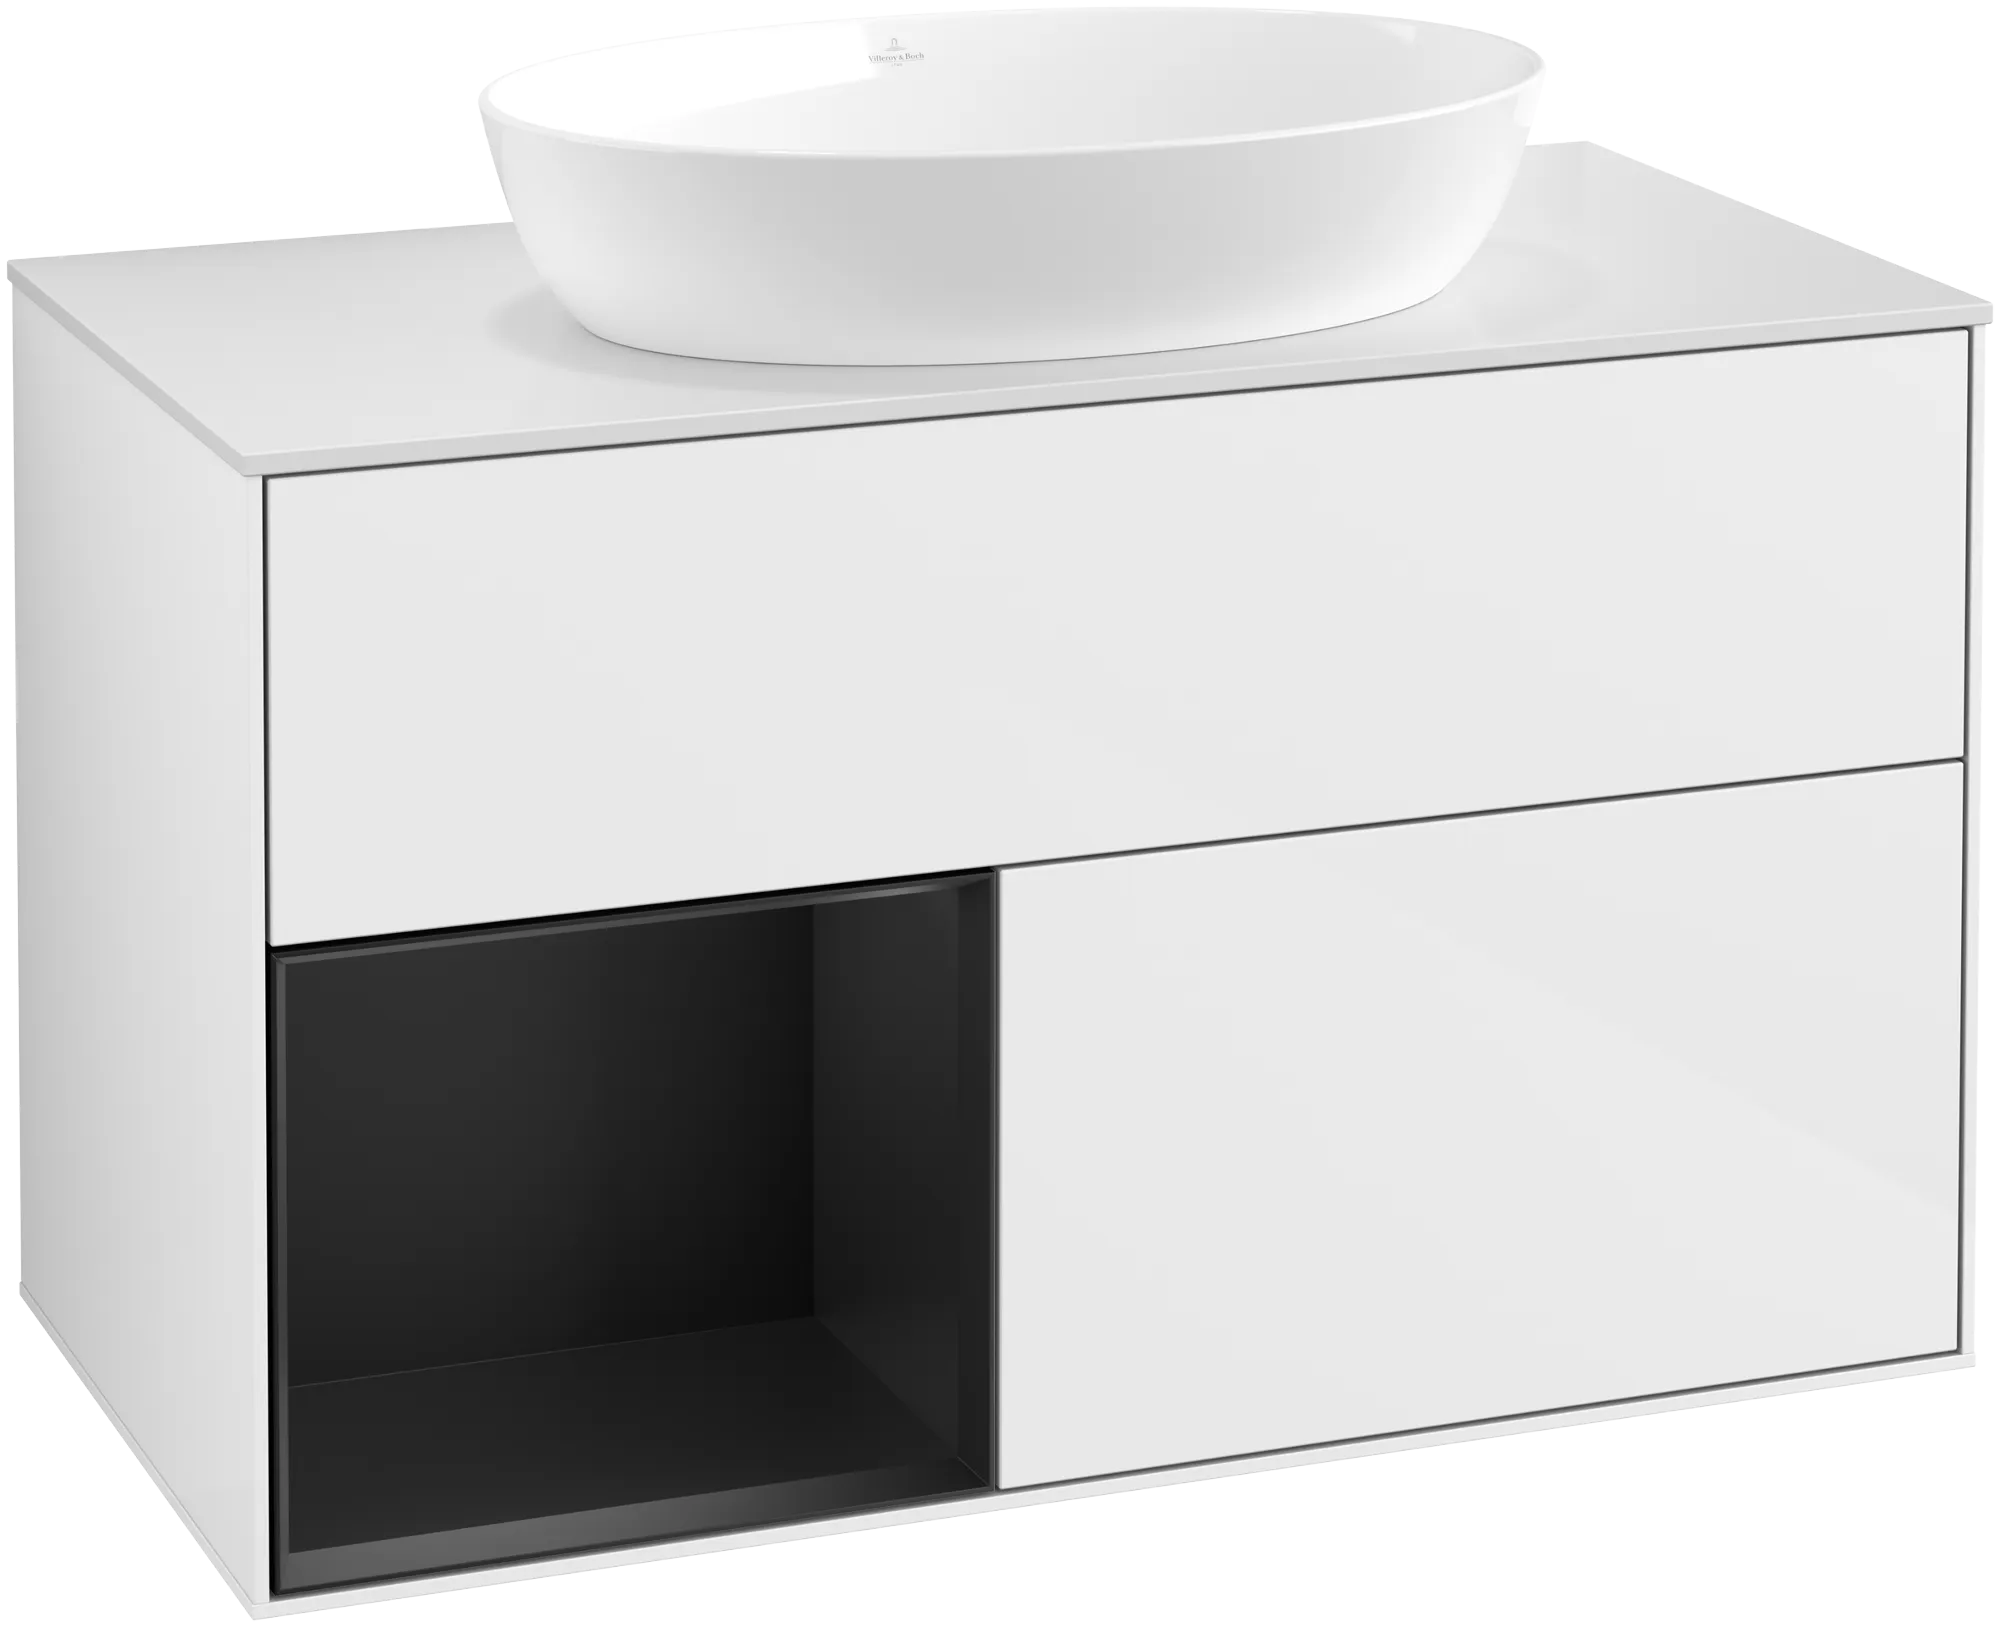 Picture of VILLEROY BOCH Finion Vanity unit, with lighting, 2 pull-out compartments, 1000 x 603 x 501 mm, Glossy White Lacquer / Black Matt Lacquer / Glass White Matt #GA11PDGF